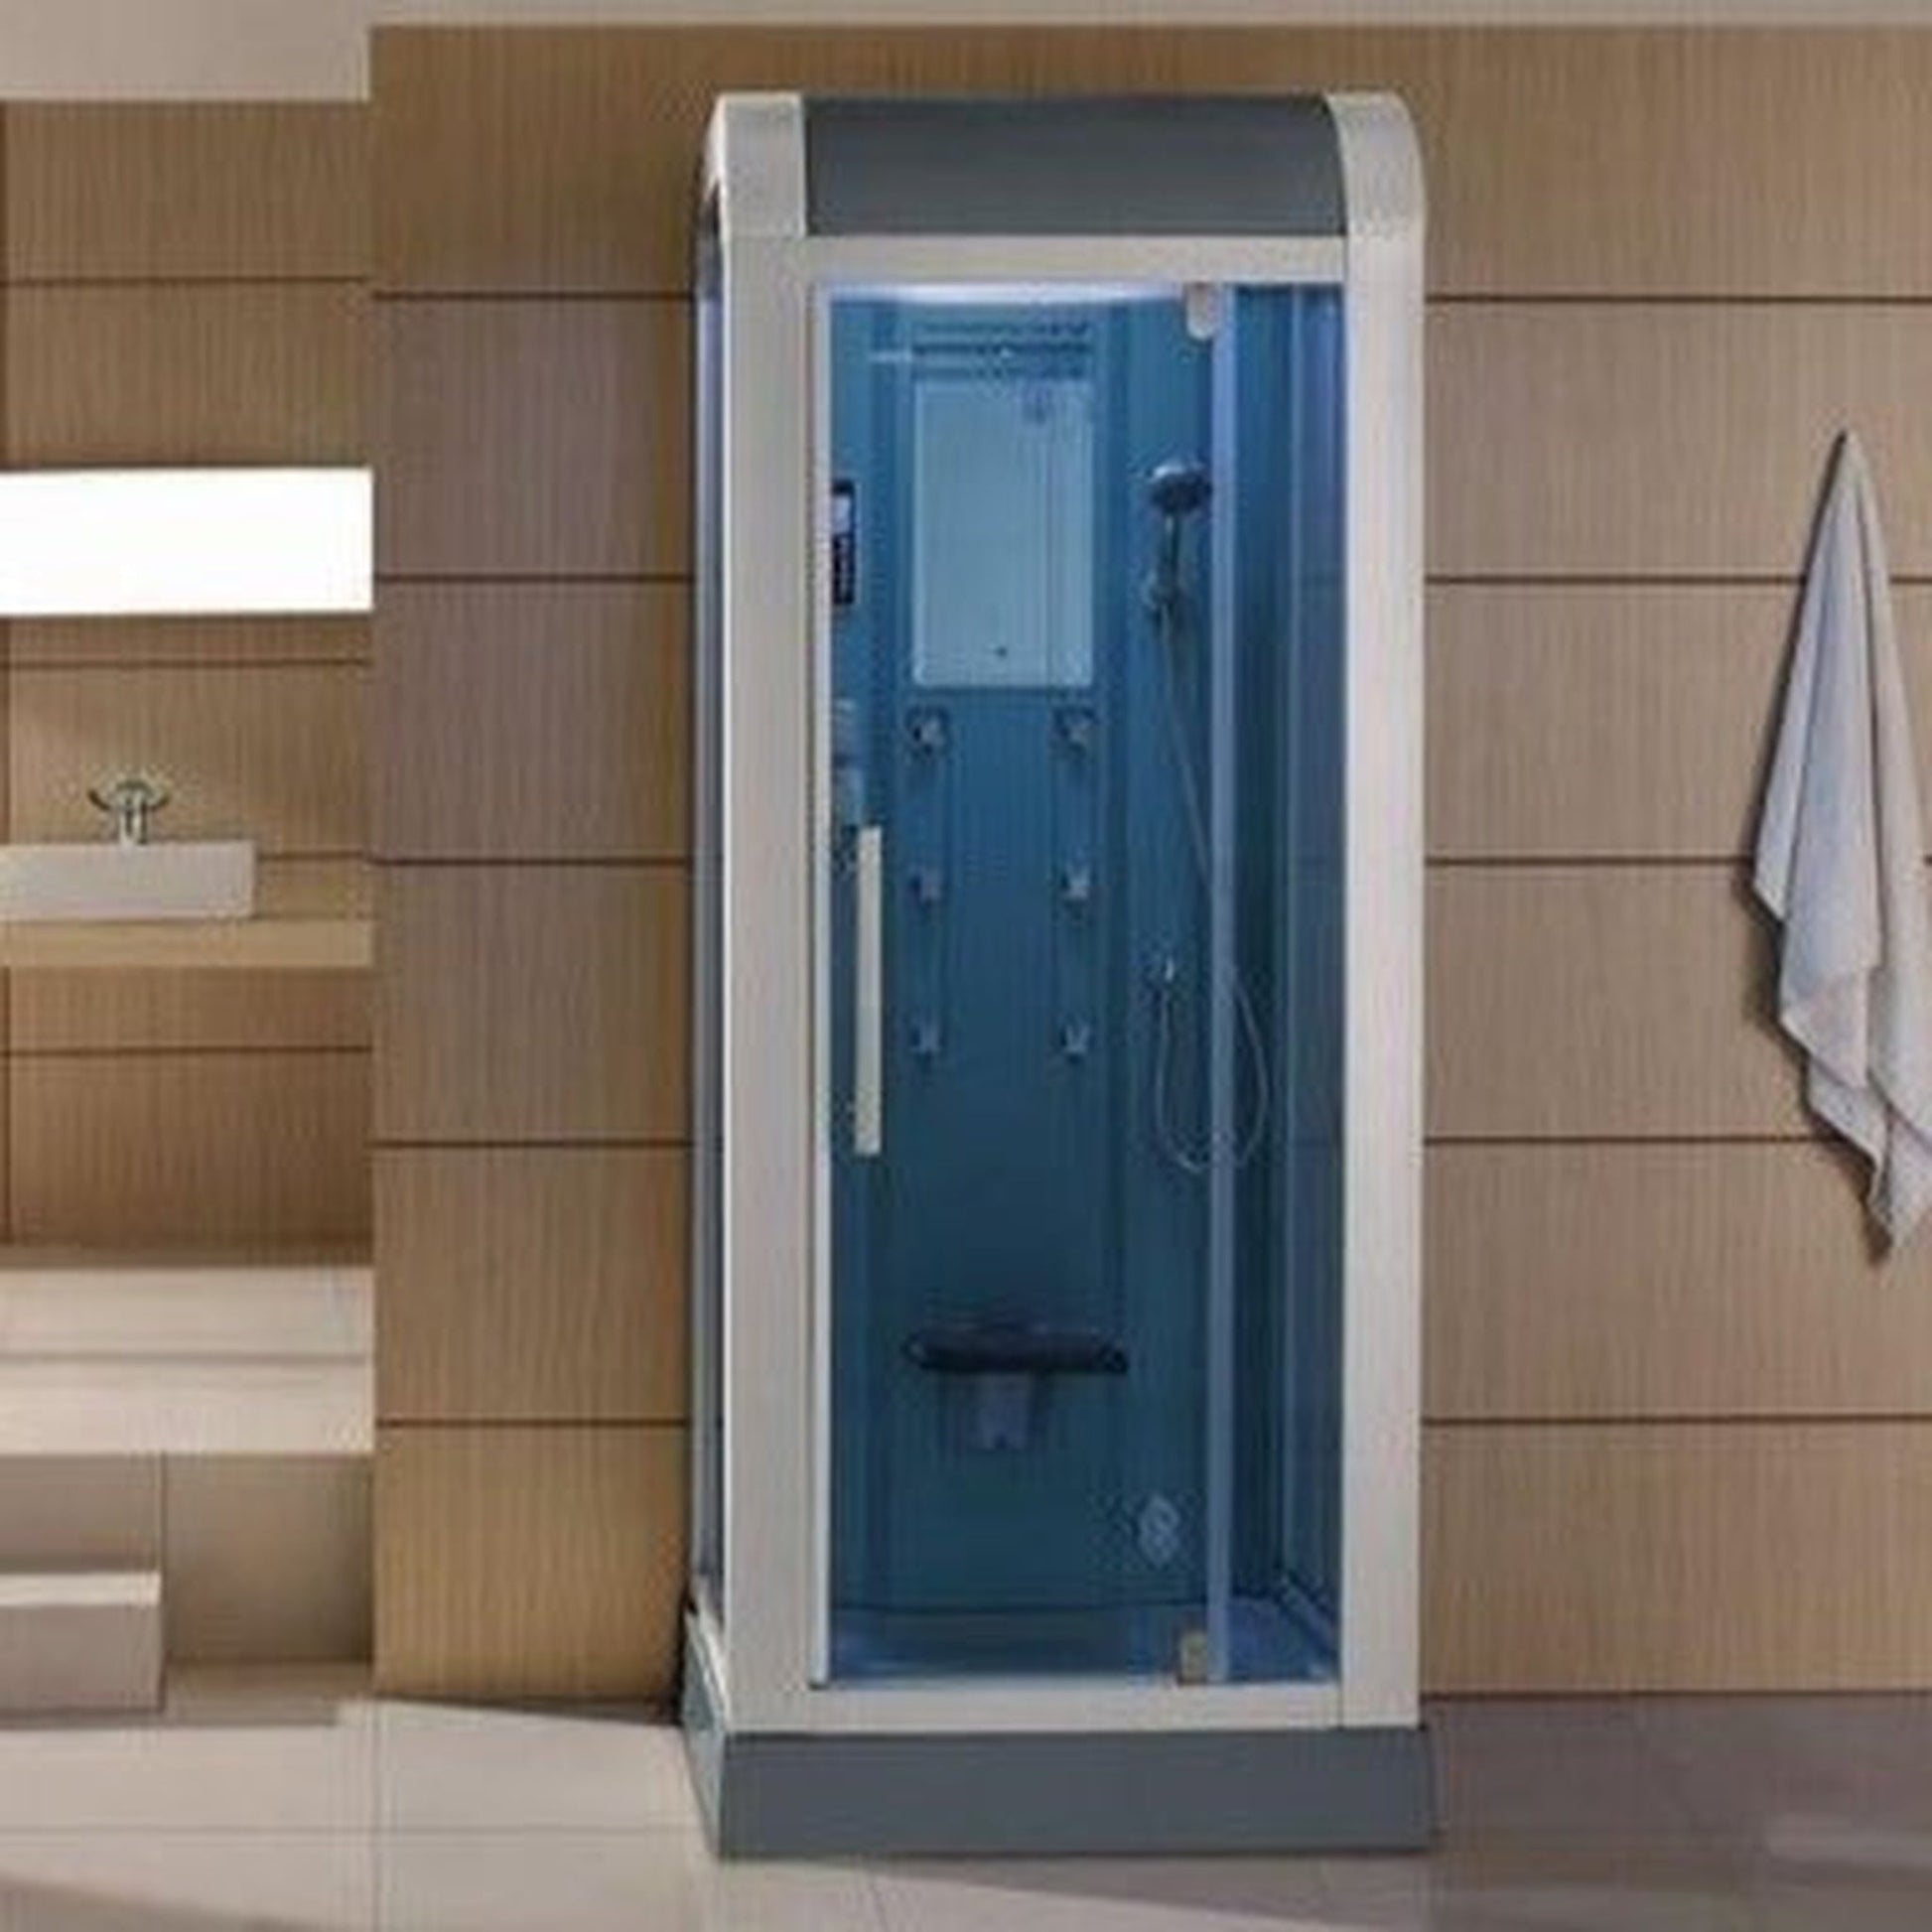 Mesa 36" x 36" x 89" Blue Tempered Glass Freestanding Walk In Steam Shower With Enclosed Top, 3kW Steam Generator, 6 Acupuncture Water Body Jets and Ozone Sterilization System